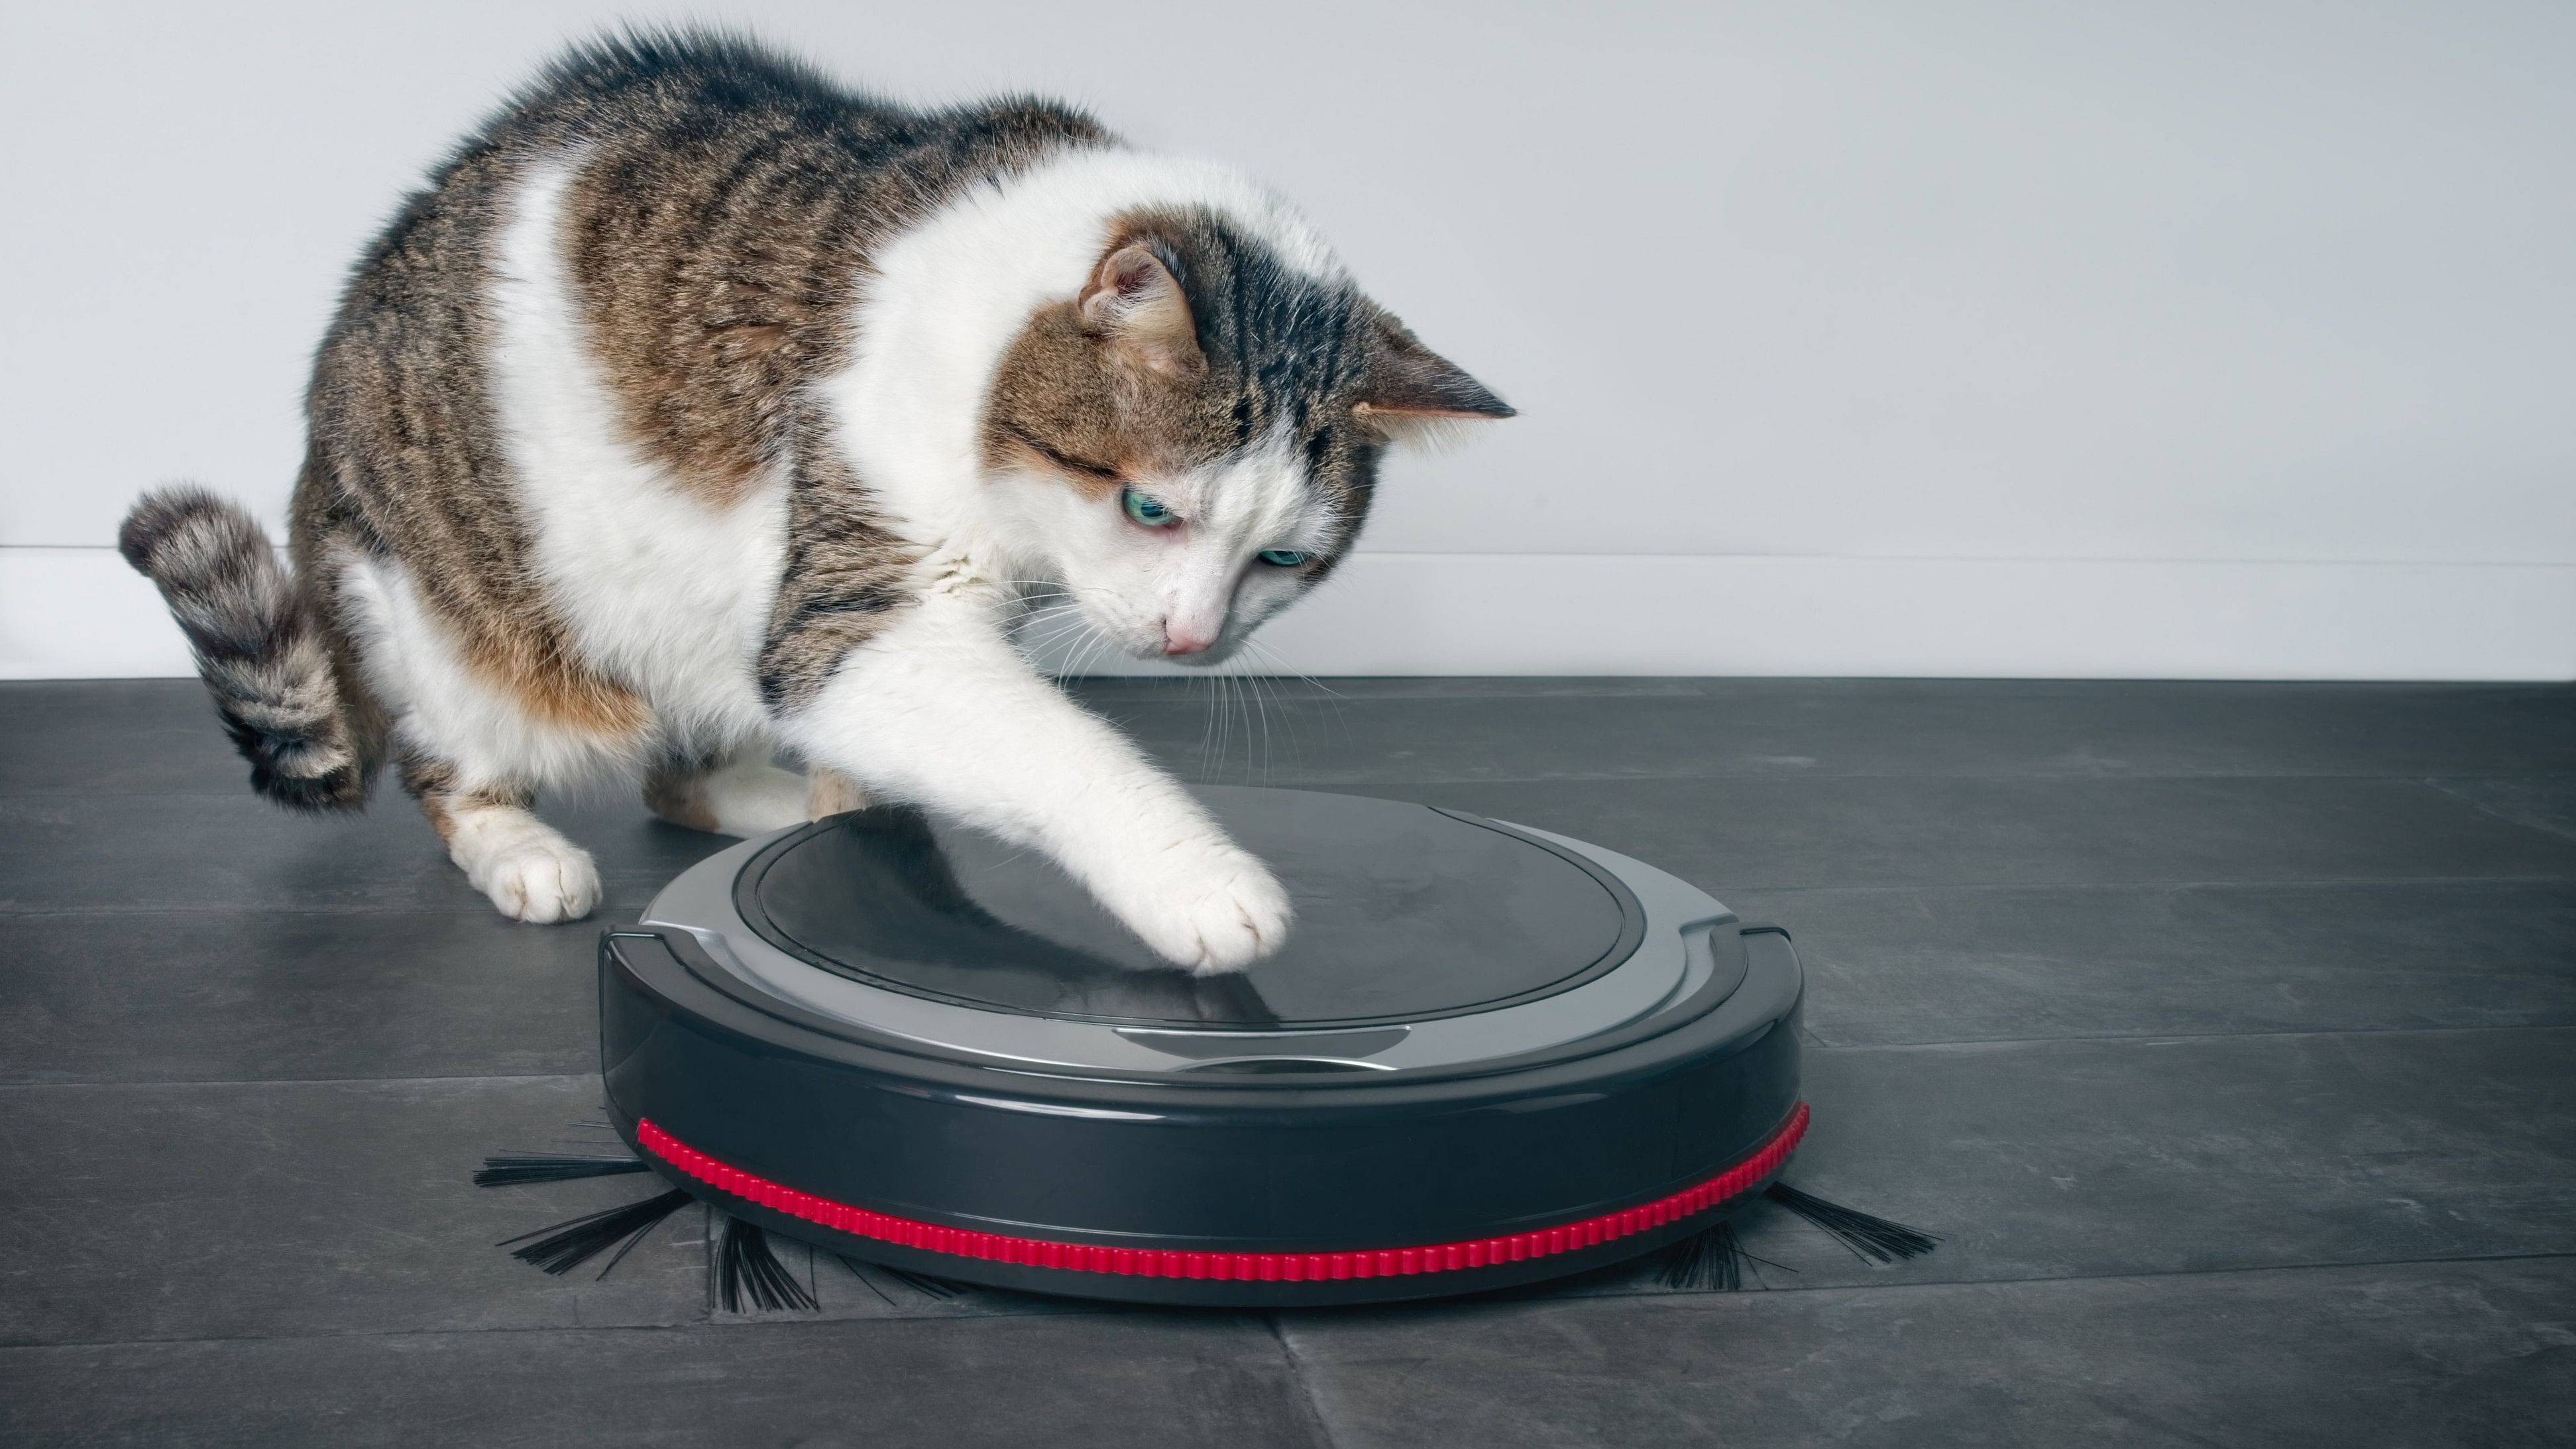 Funny tabby cat playing with a robot vacuum cleaner.
